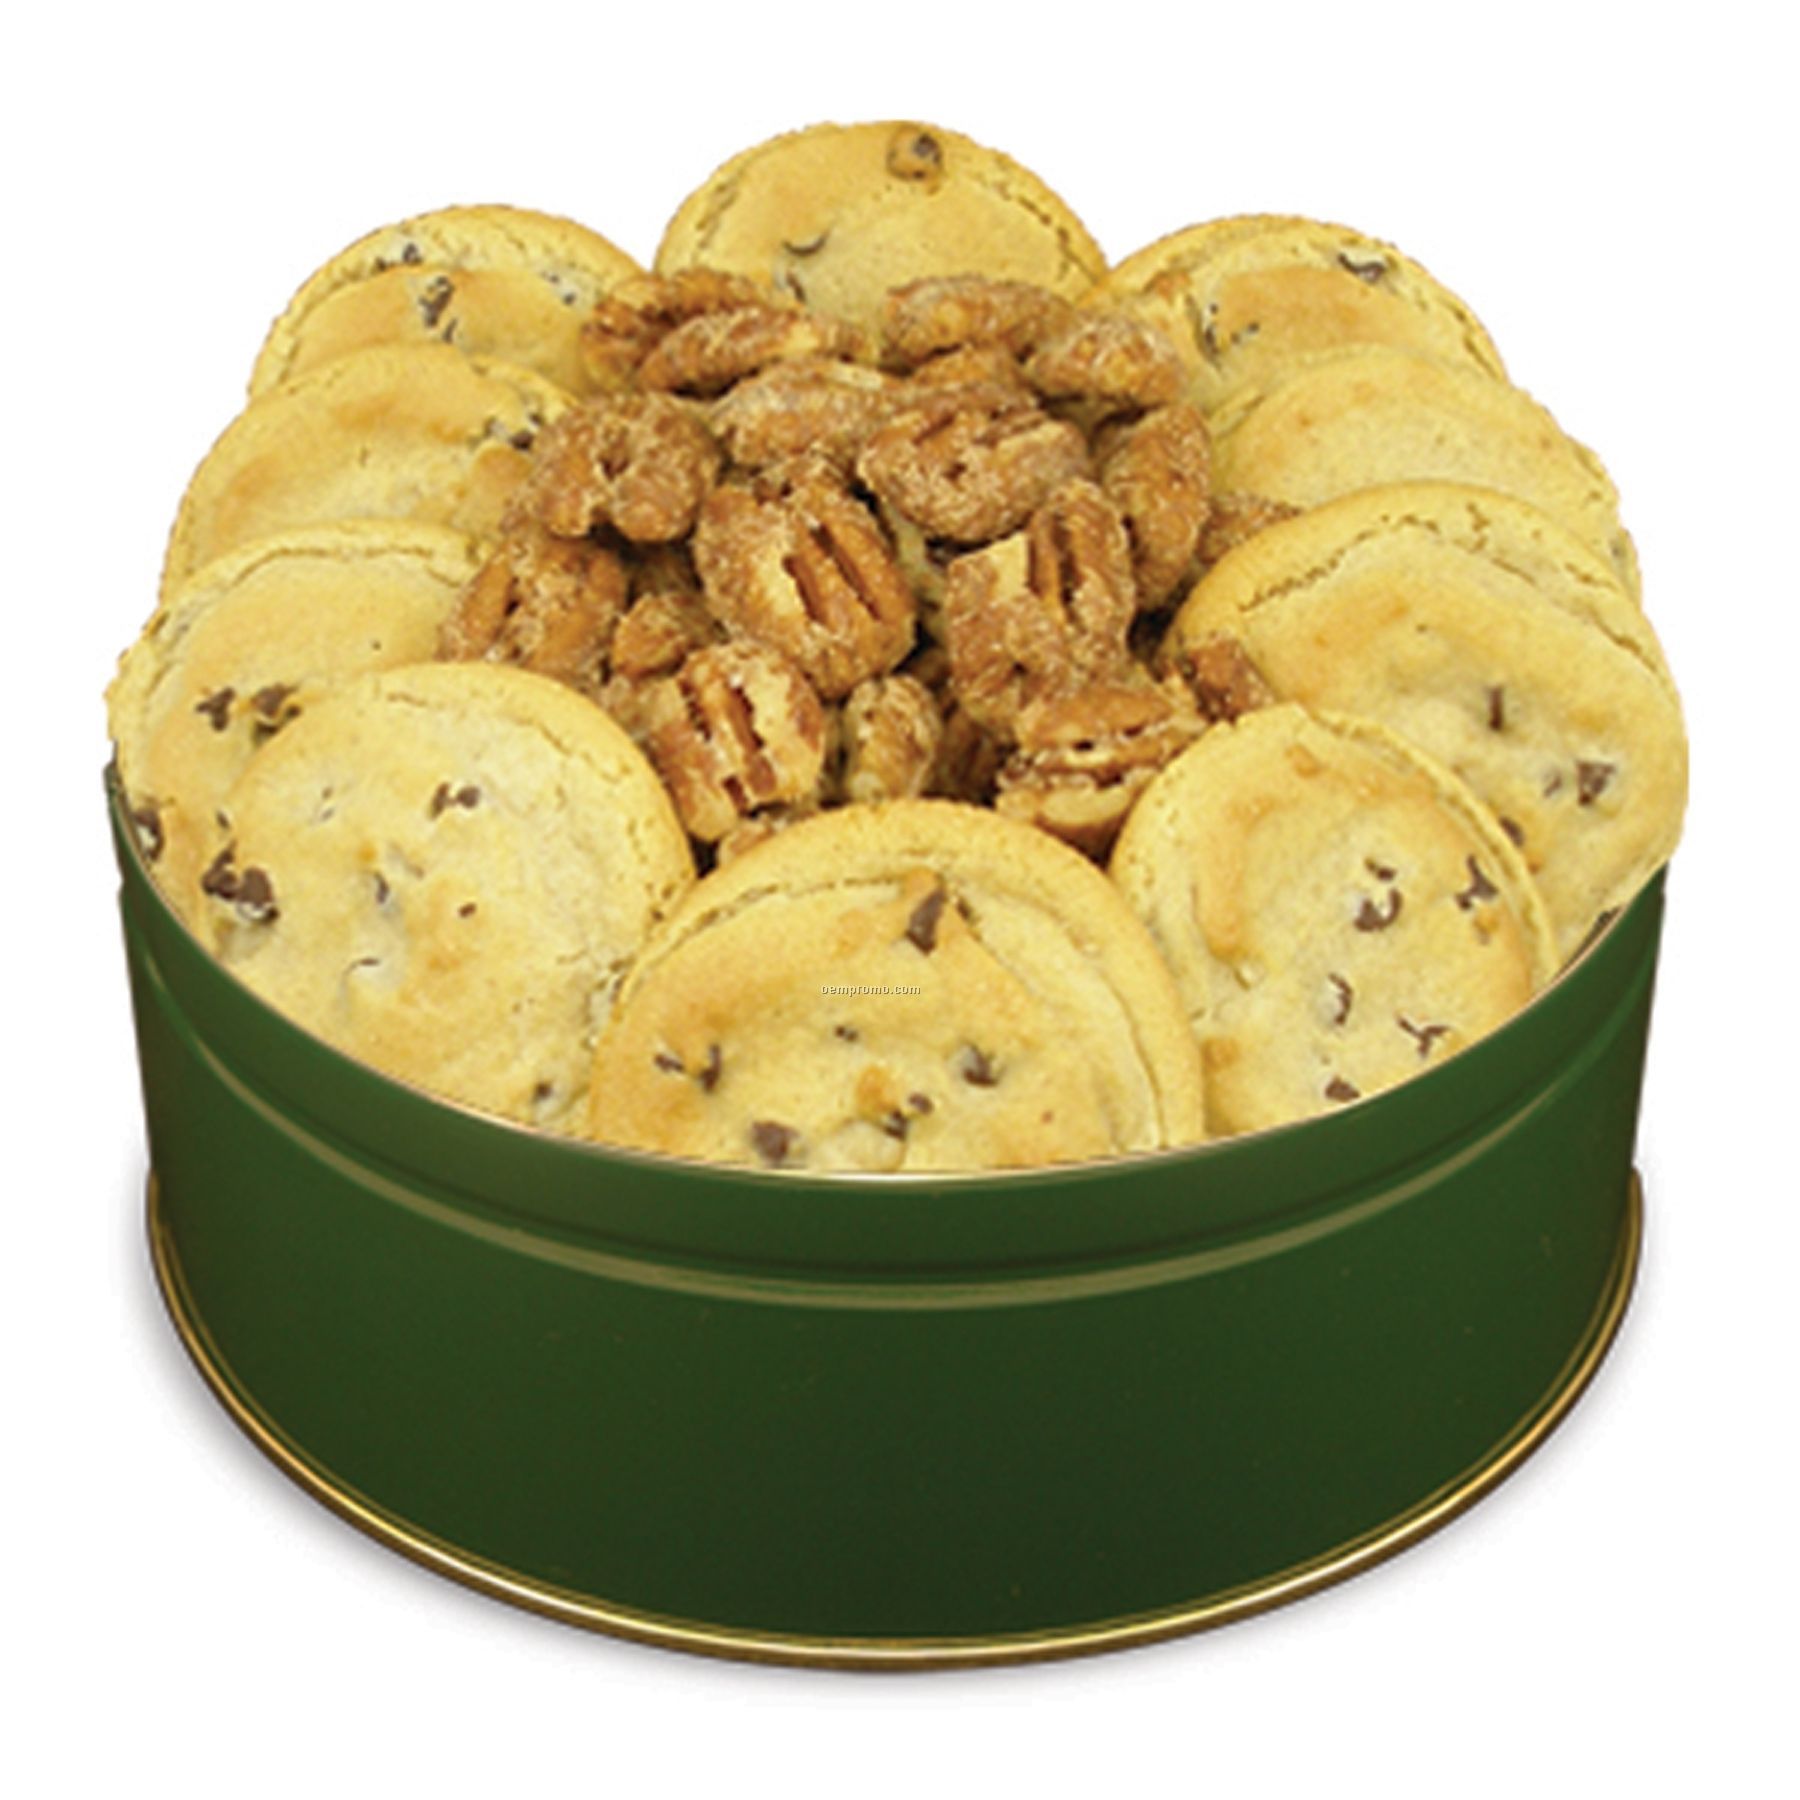 Cookie Nut Combos - Chocolate Chip (10 Cookies) Toasted Pecans (8 Oz.)